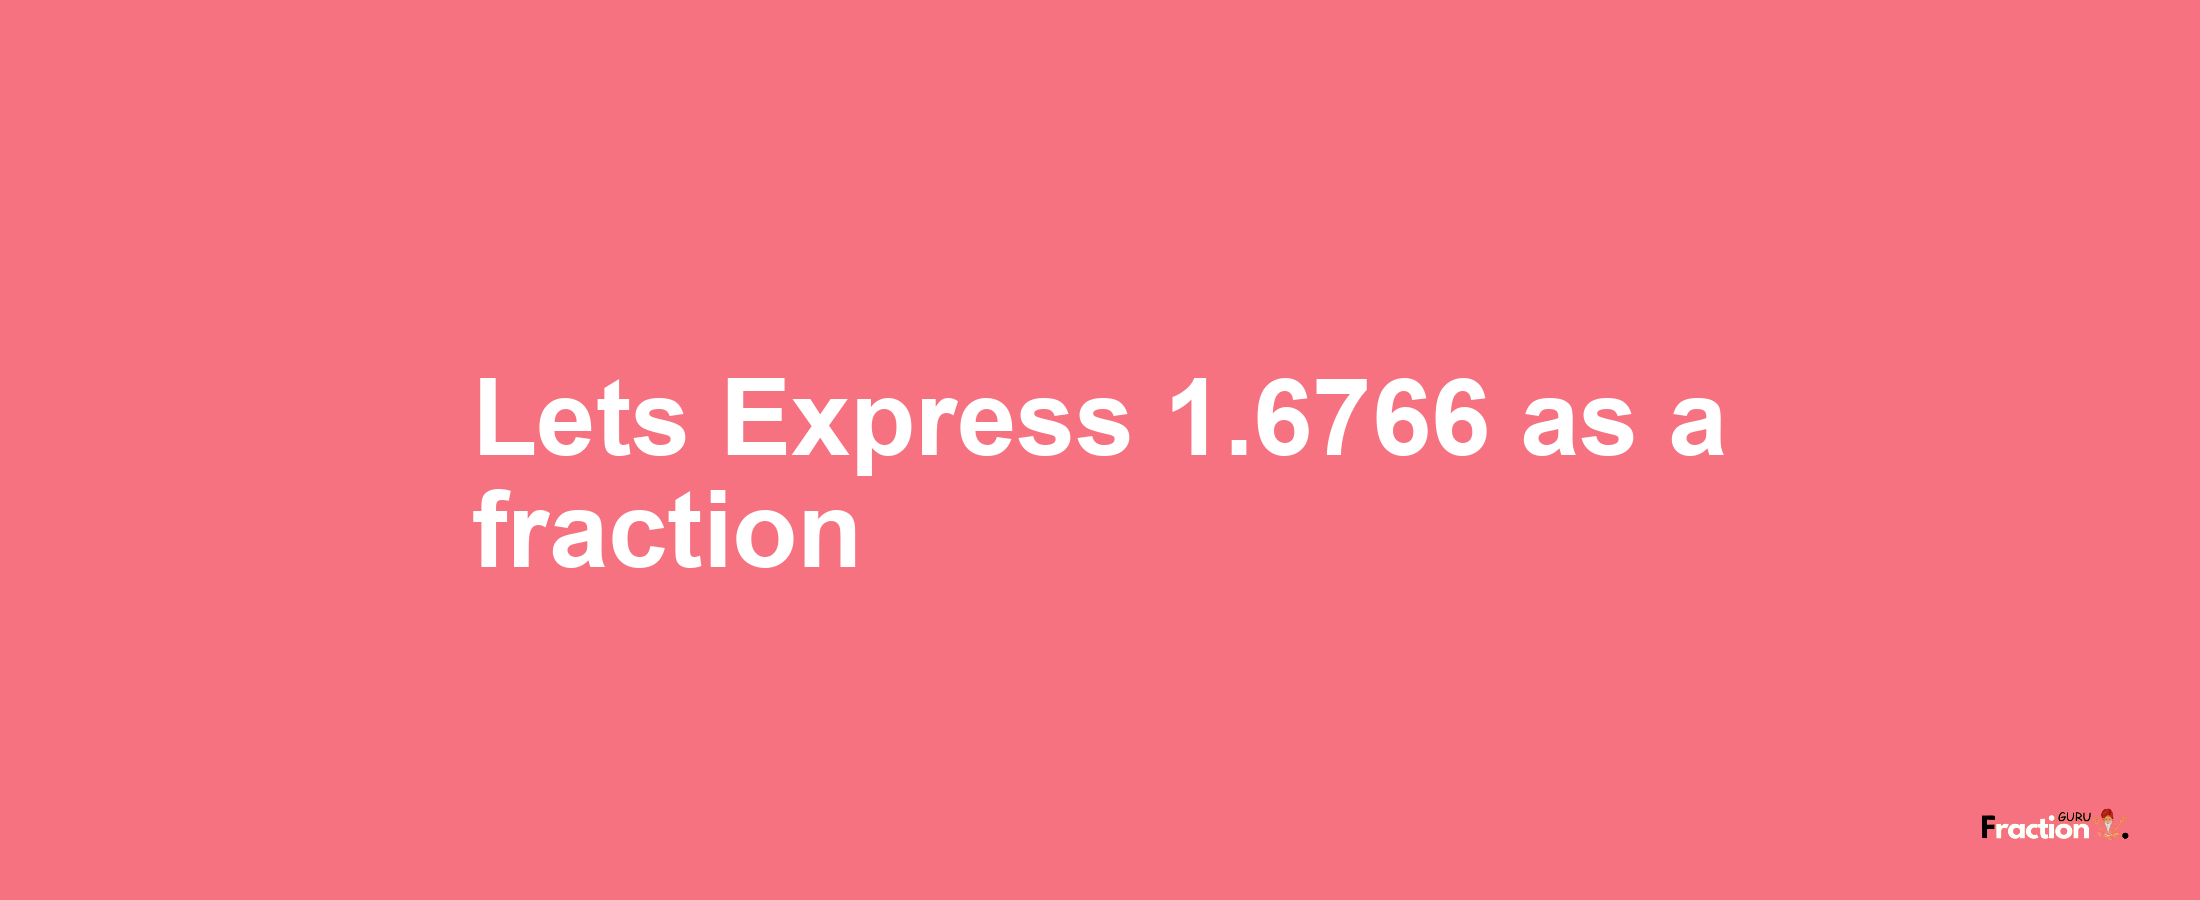 Lets Express 1.6766 as afraction